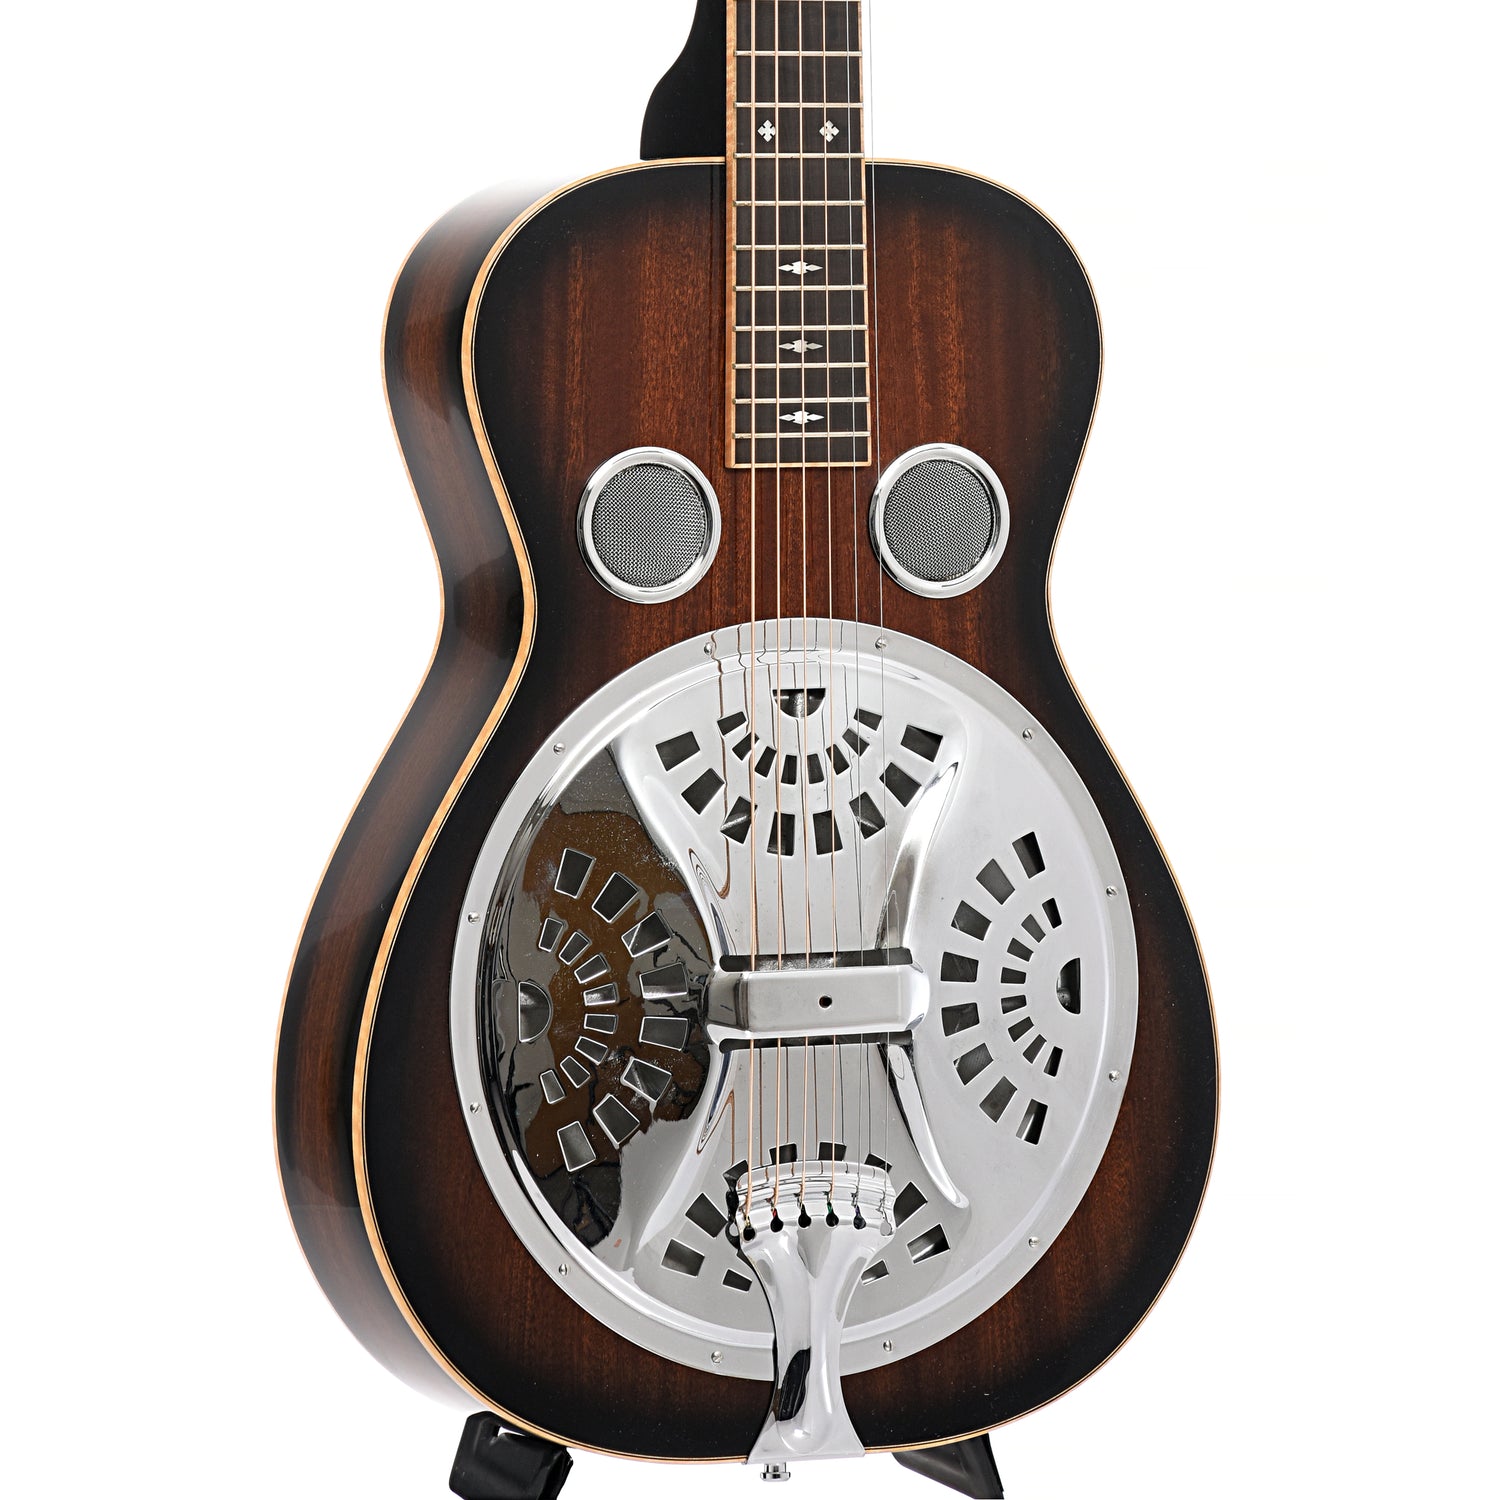 Front and side of Beard BSR1 Squareneck Resonator 